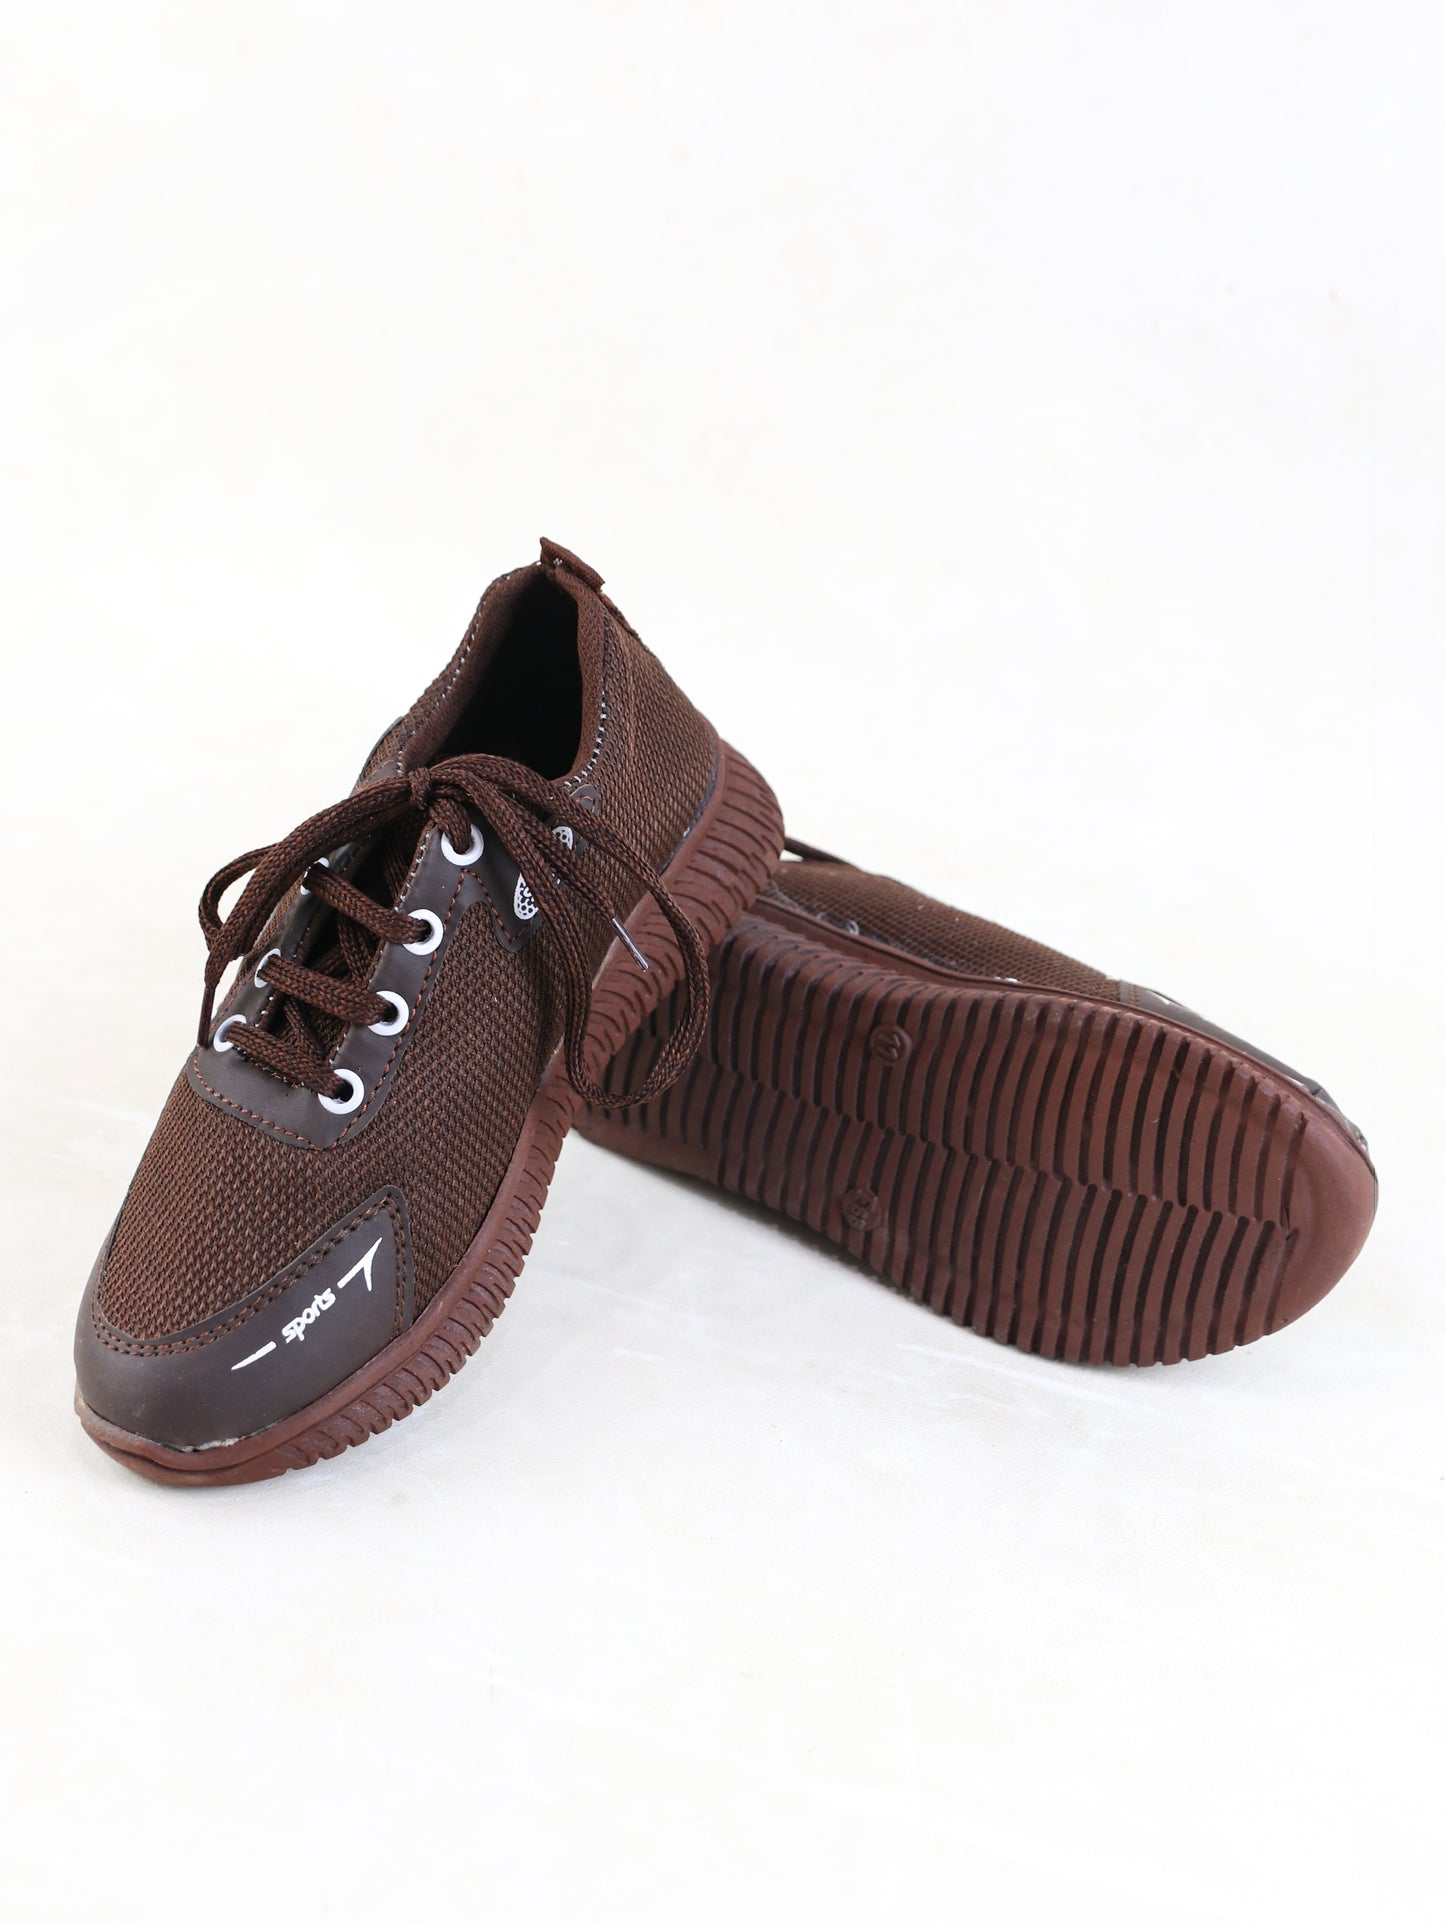 BS44 Boys Lace Shoes 13Yrs - 17Yrs Brown